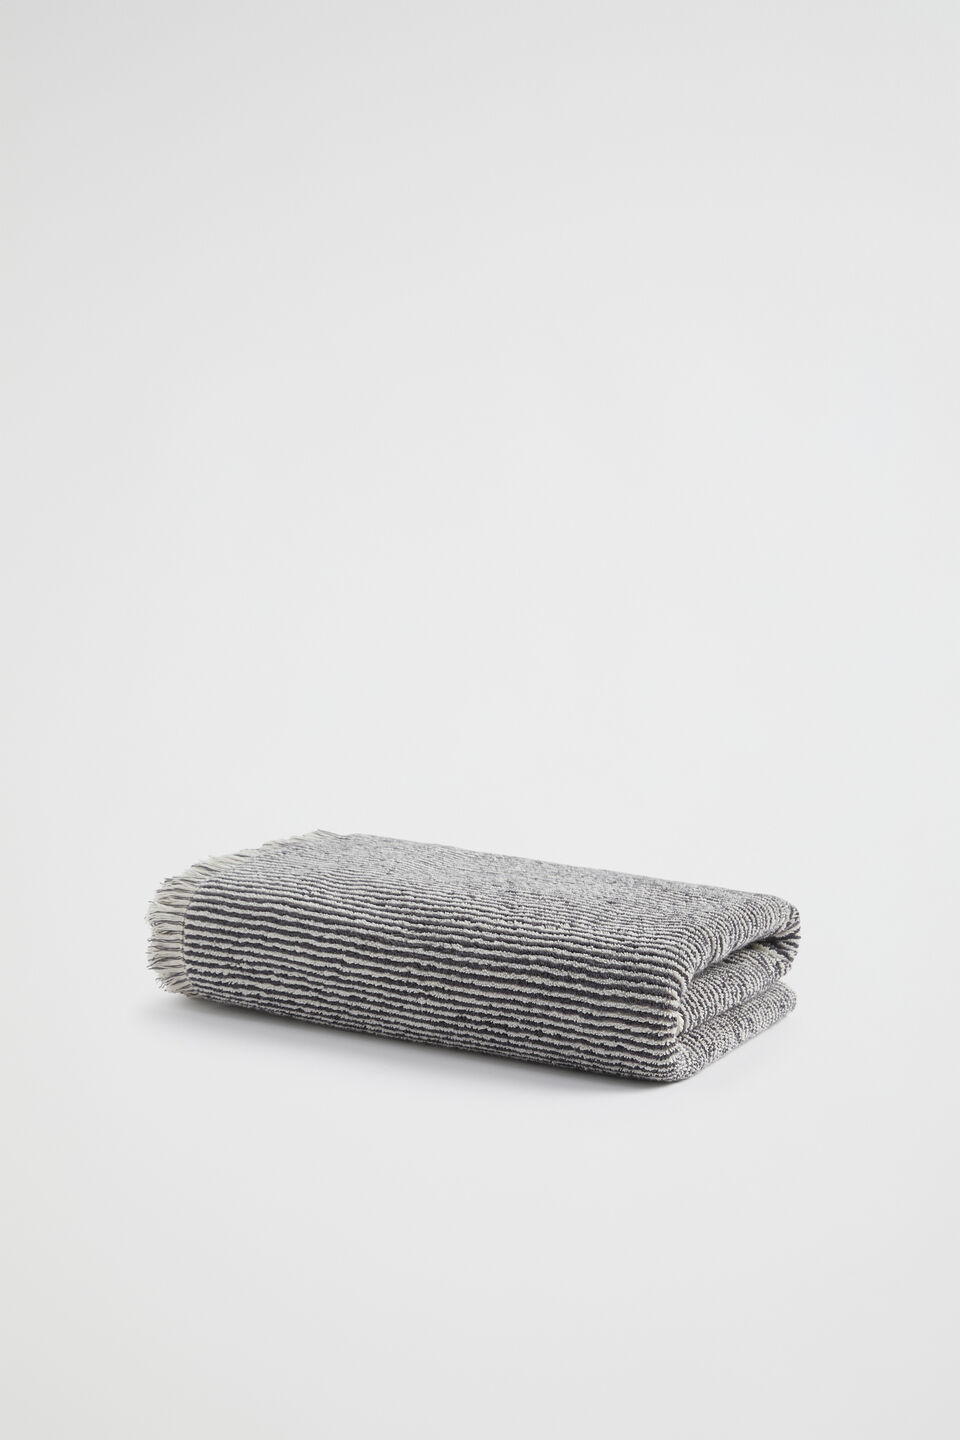 Stripe Textured Towel  Charcoal